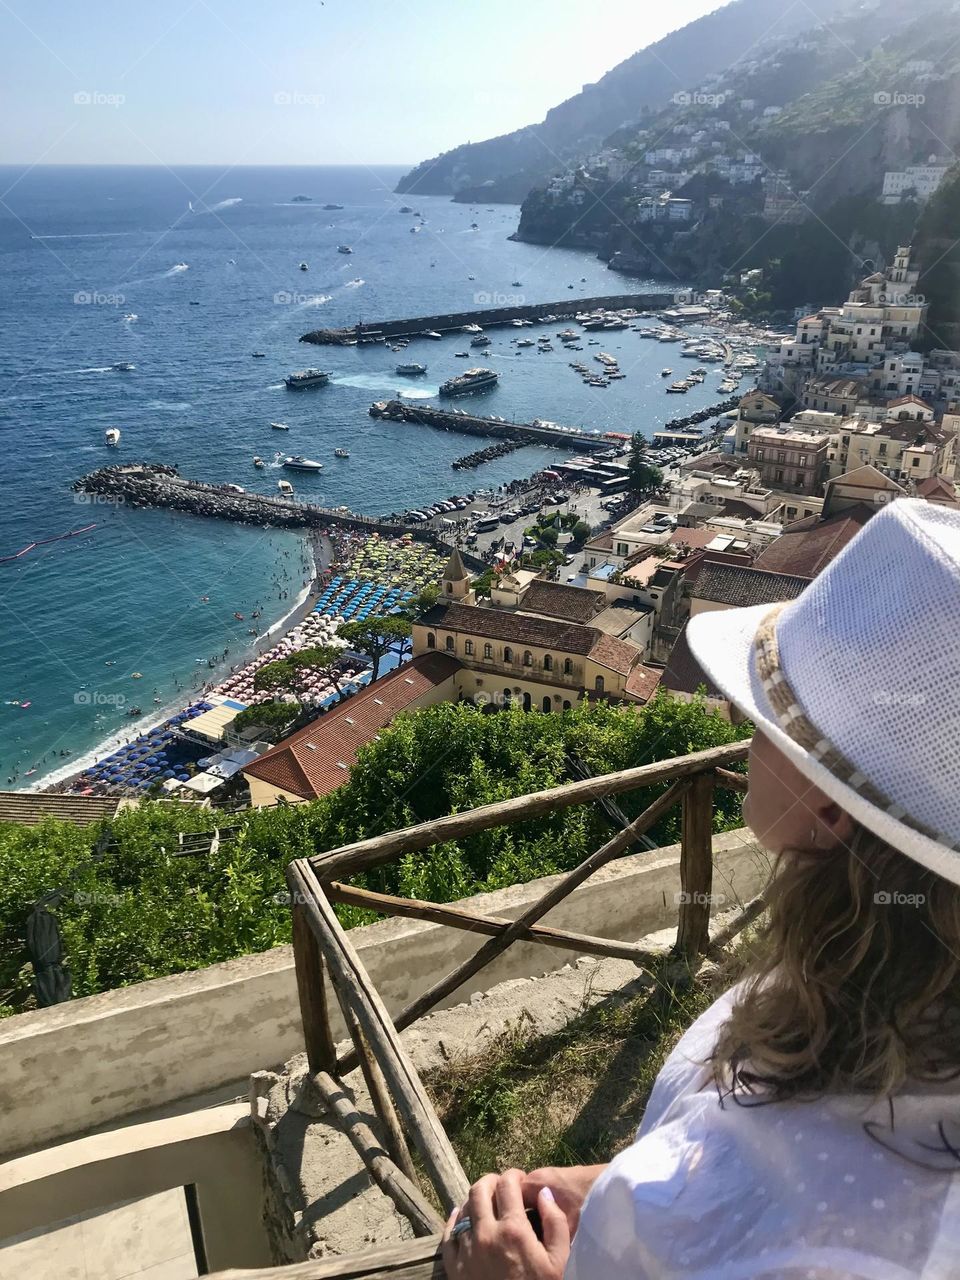 My wife taking in the amazing views of the Amalfi Coast. 